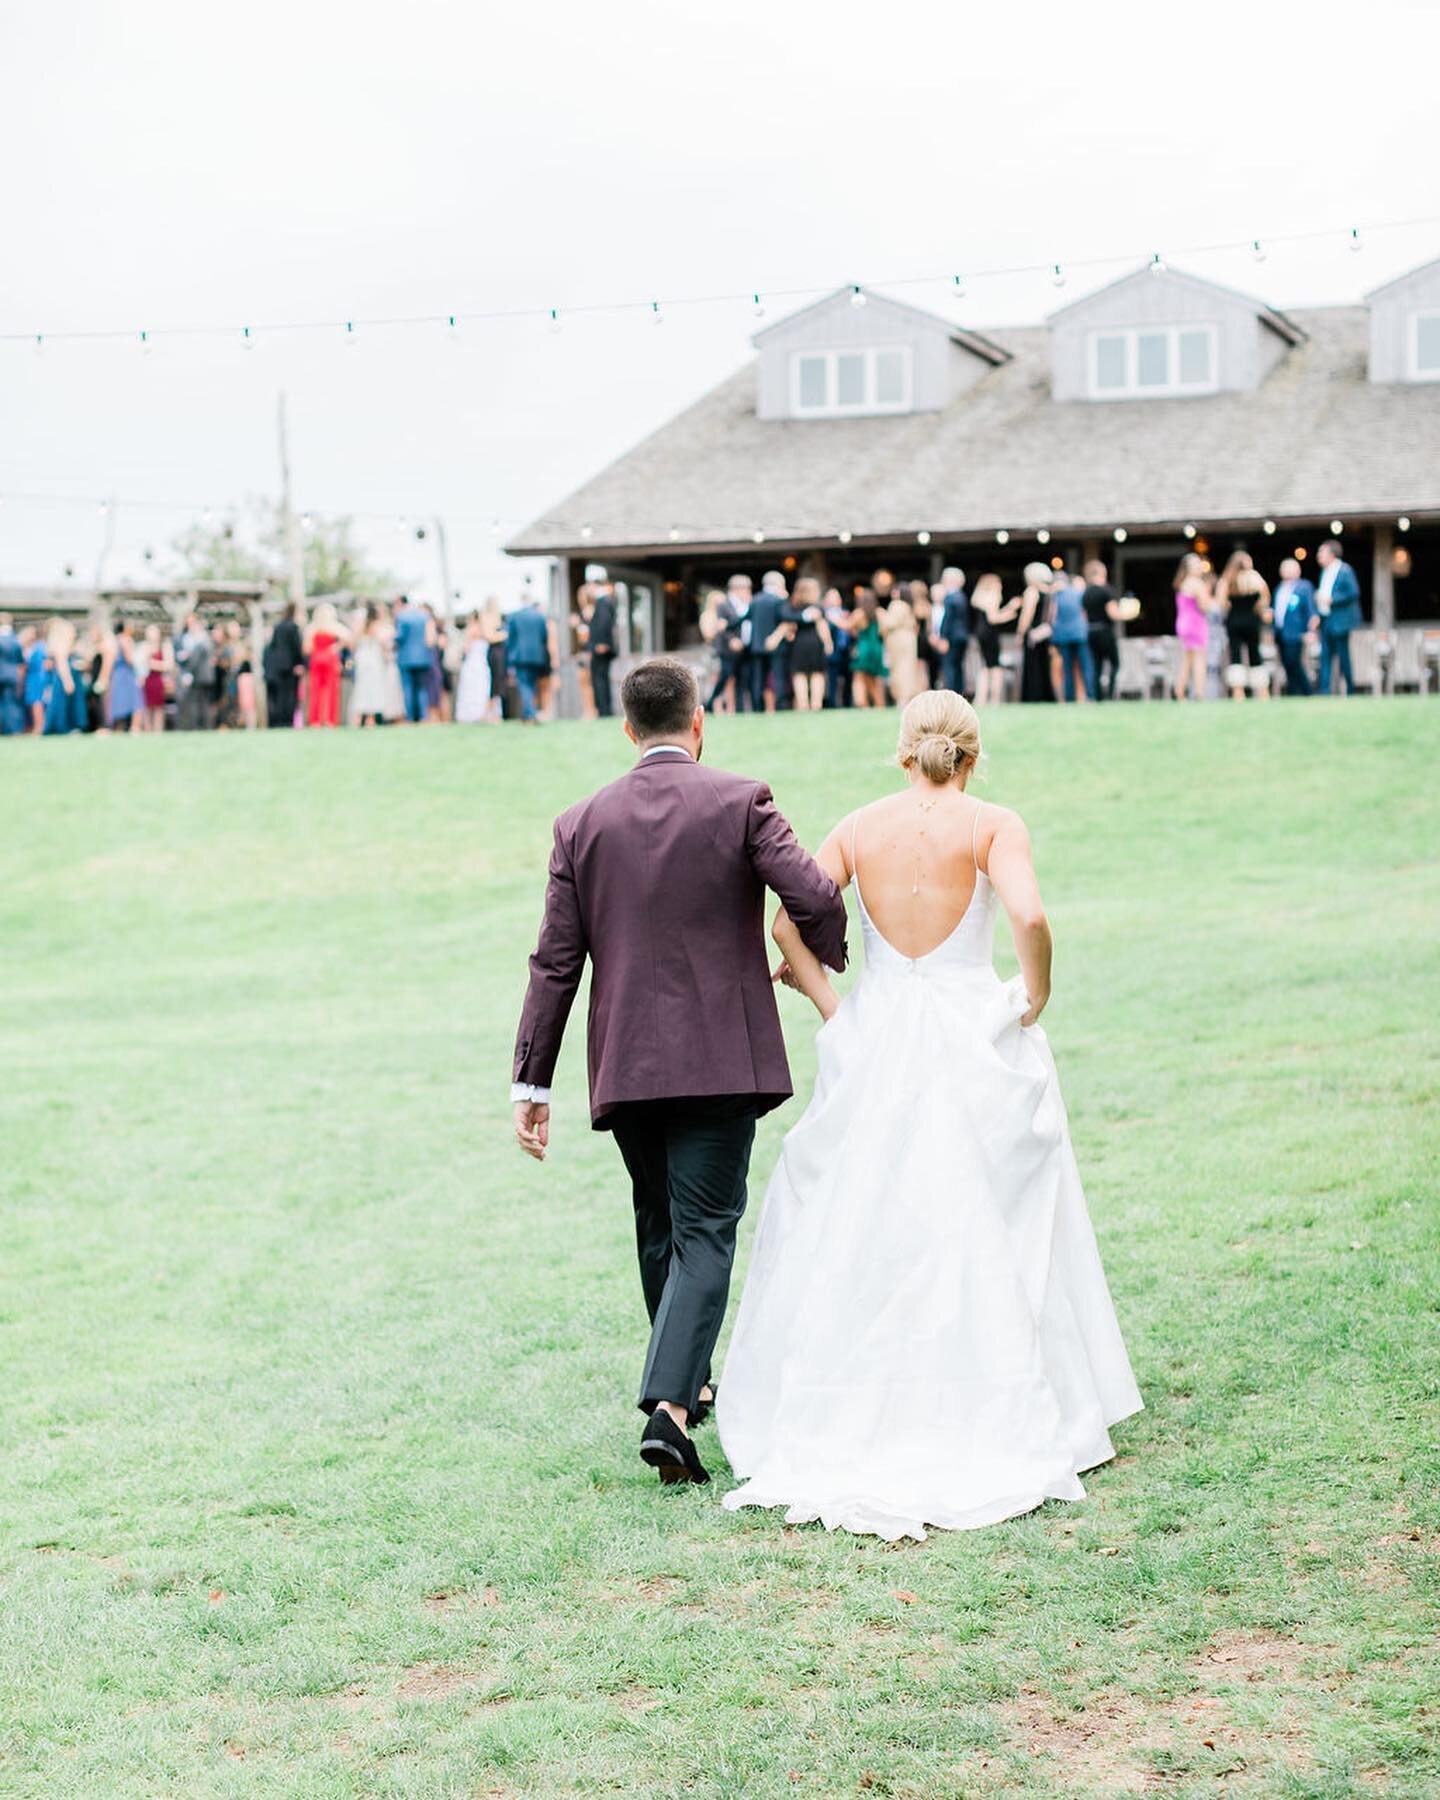 this weekend we're heading back to Montauk to celebrate Katie &amp; Adam, so we're letting these photos get us all excited for another Crow's Nest wedding! does it get more Hamptons than this?
.
.
.
📍@crowsnestmtk
📷 @cadence_kennedy
🎶 @silverarrow